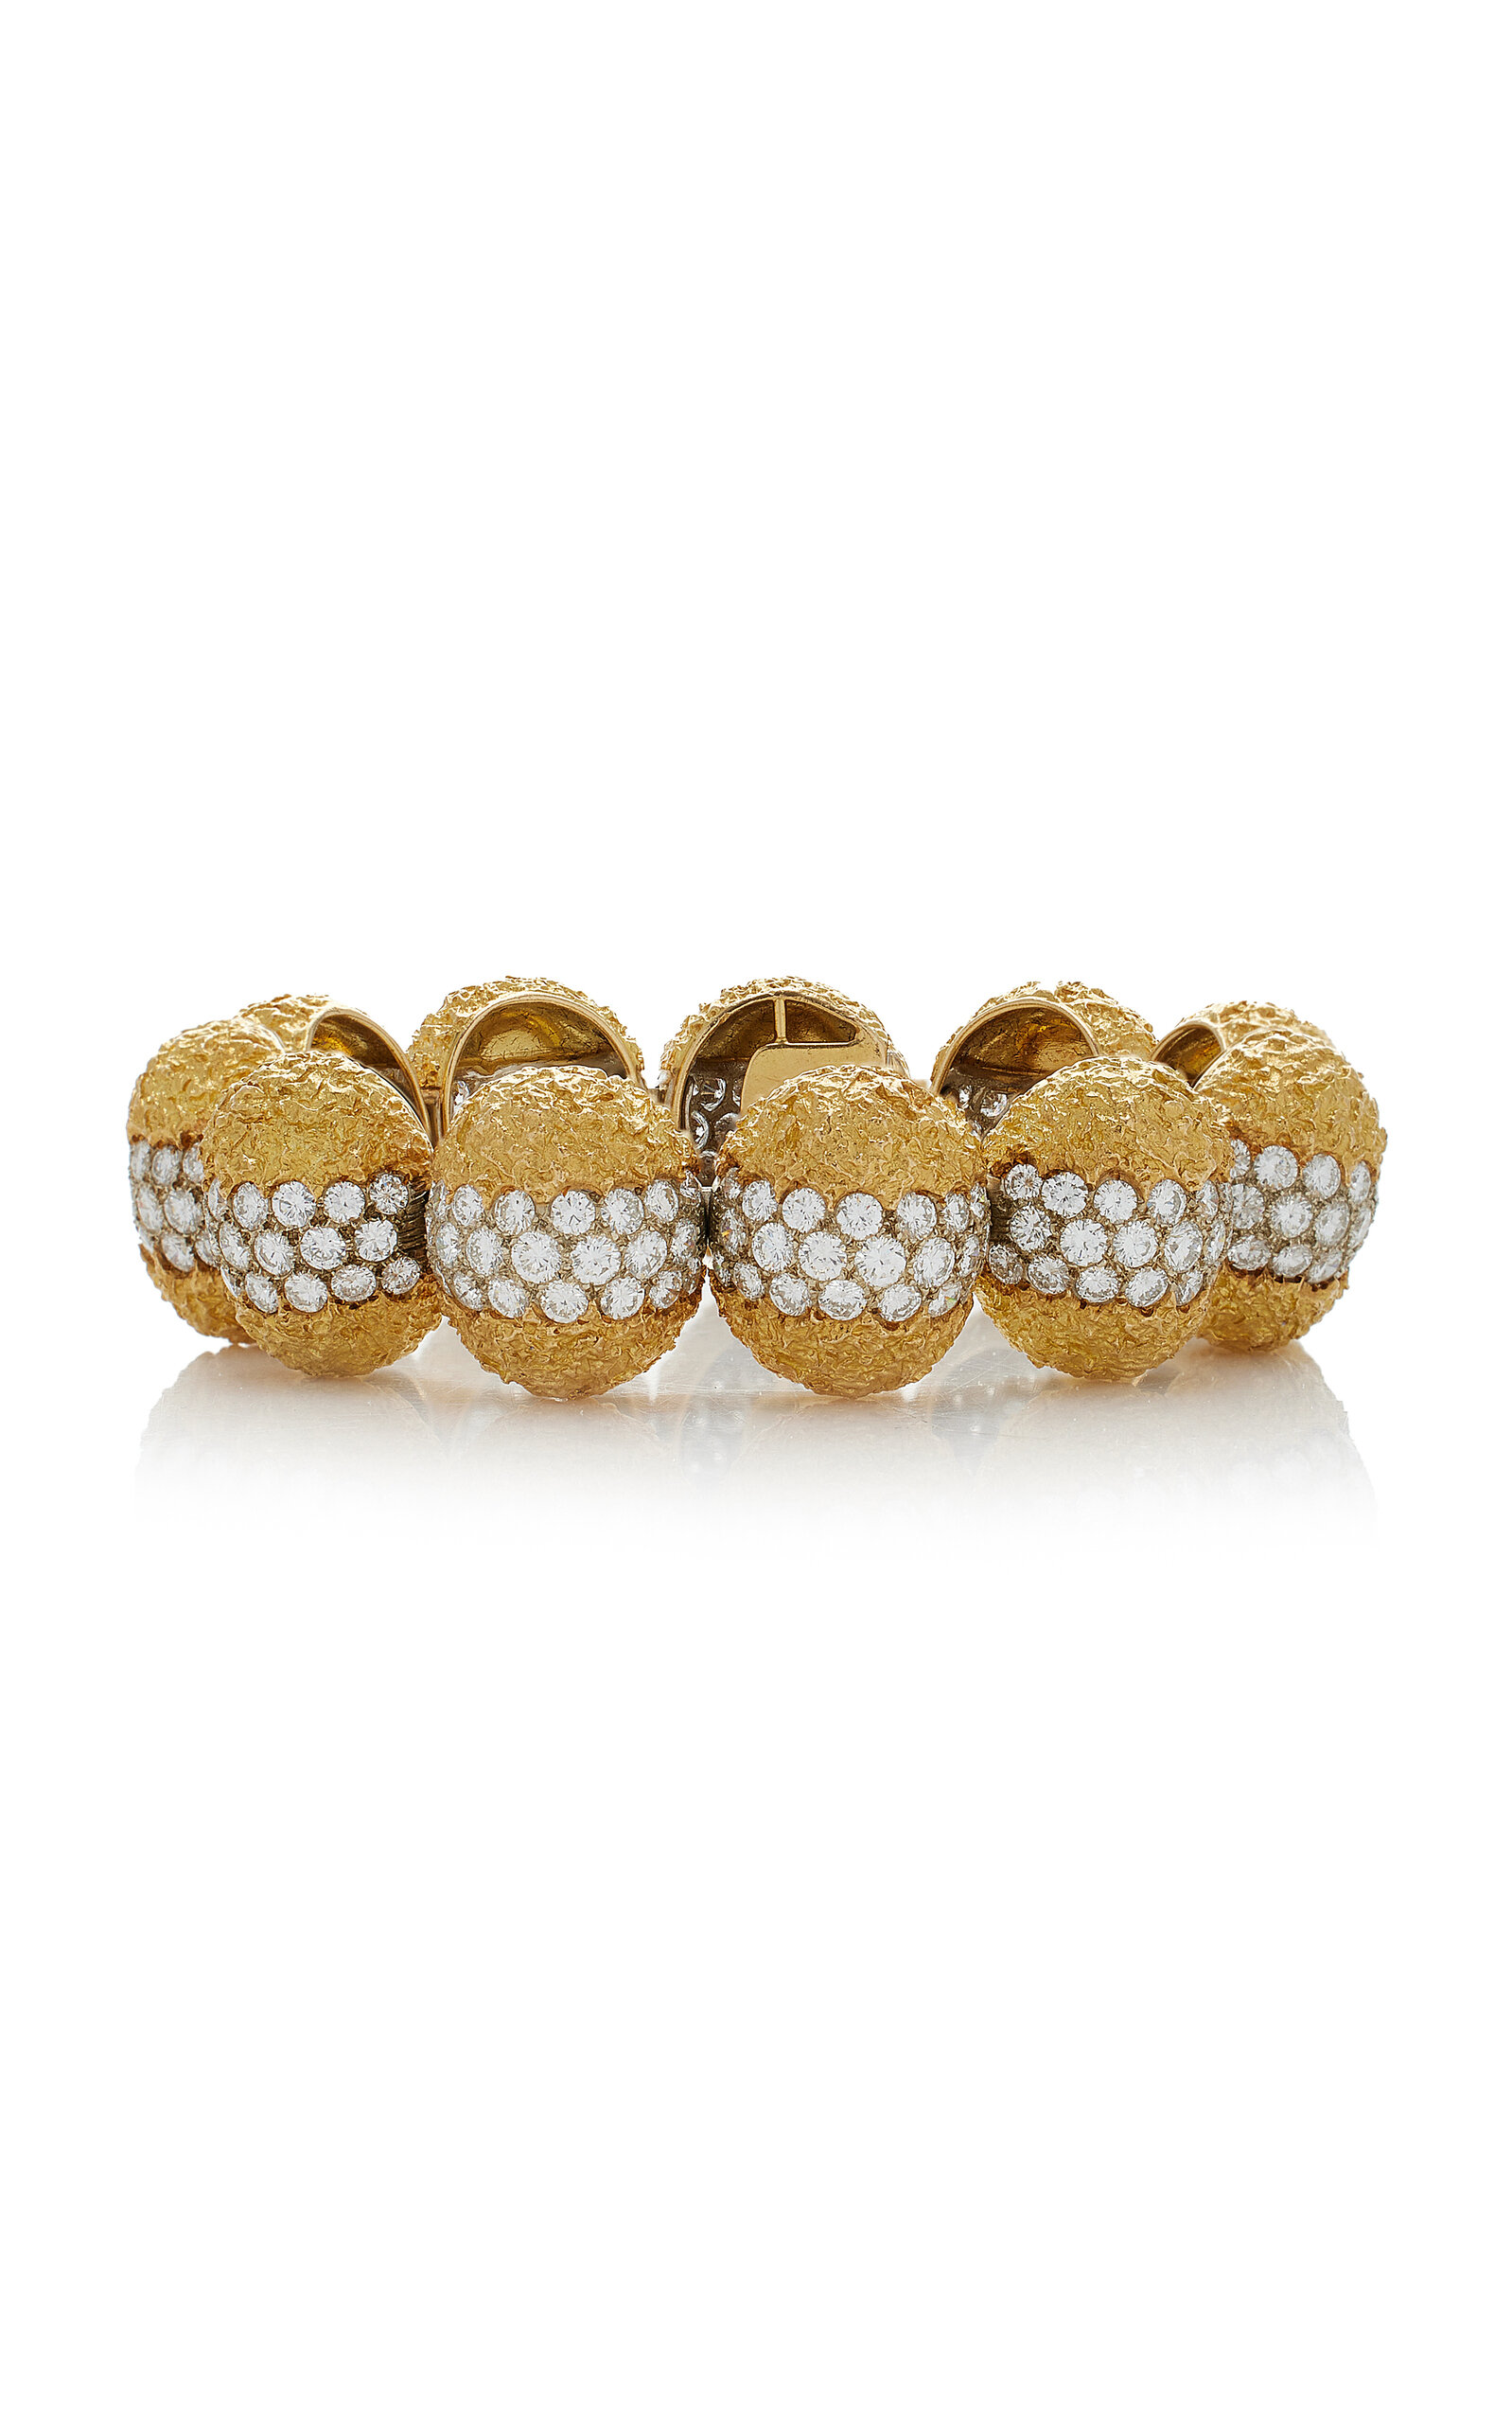 Gold and Diamond Bombe Panel Bracelet; By Cartier